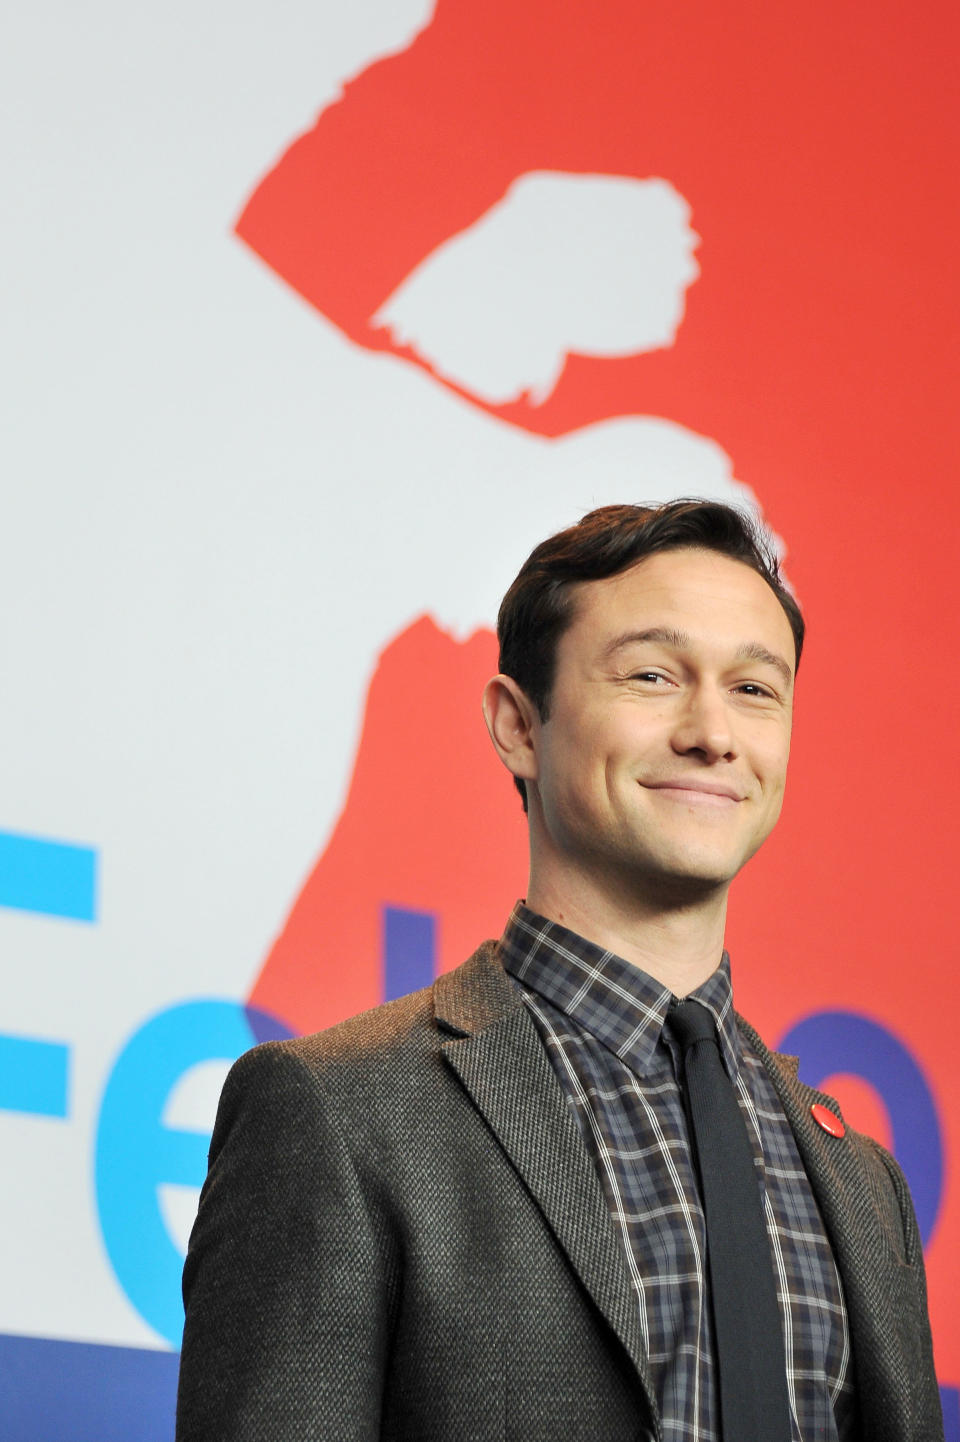 BERLIN, GERMANY - FEBRUARY 08:  Director and actor Joseph Gordon Levitt attends 'Don Jon's Addiction' Press Conference during the 63rd Berlinale International Film Festival at the Grand Hyatt Hotel on February 8, 2013 in Berlin, Germany.  (Photo by Pascal Le Segretain/Getty Images)